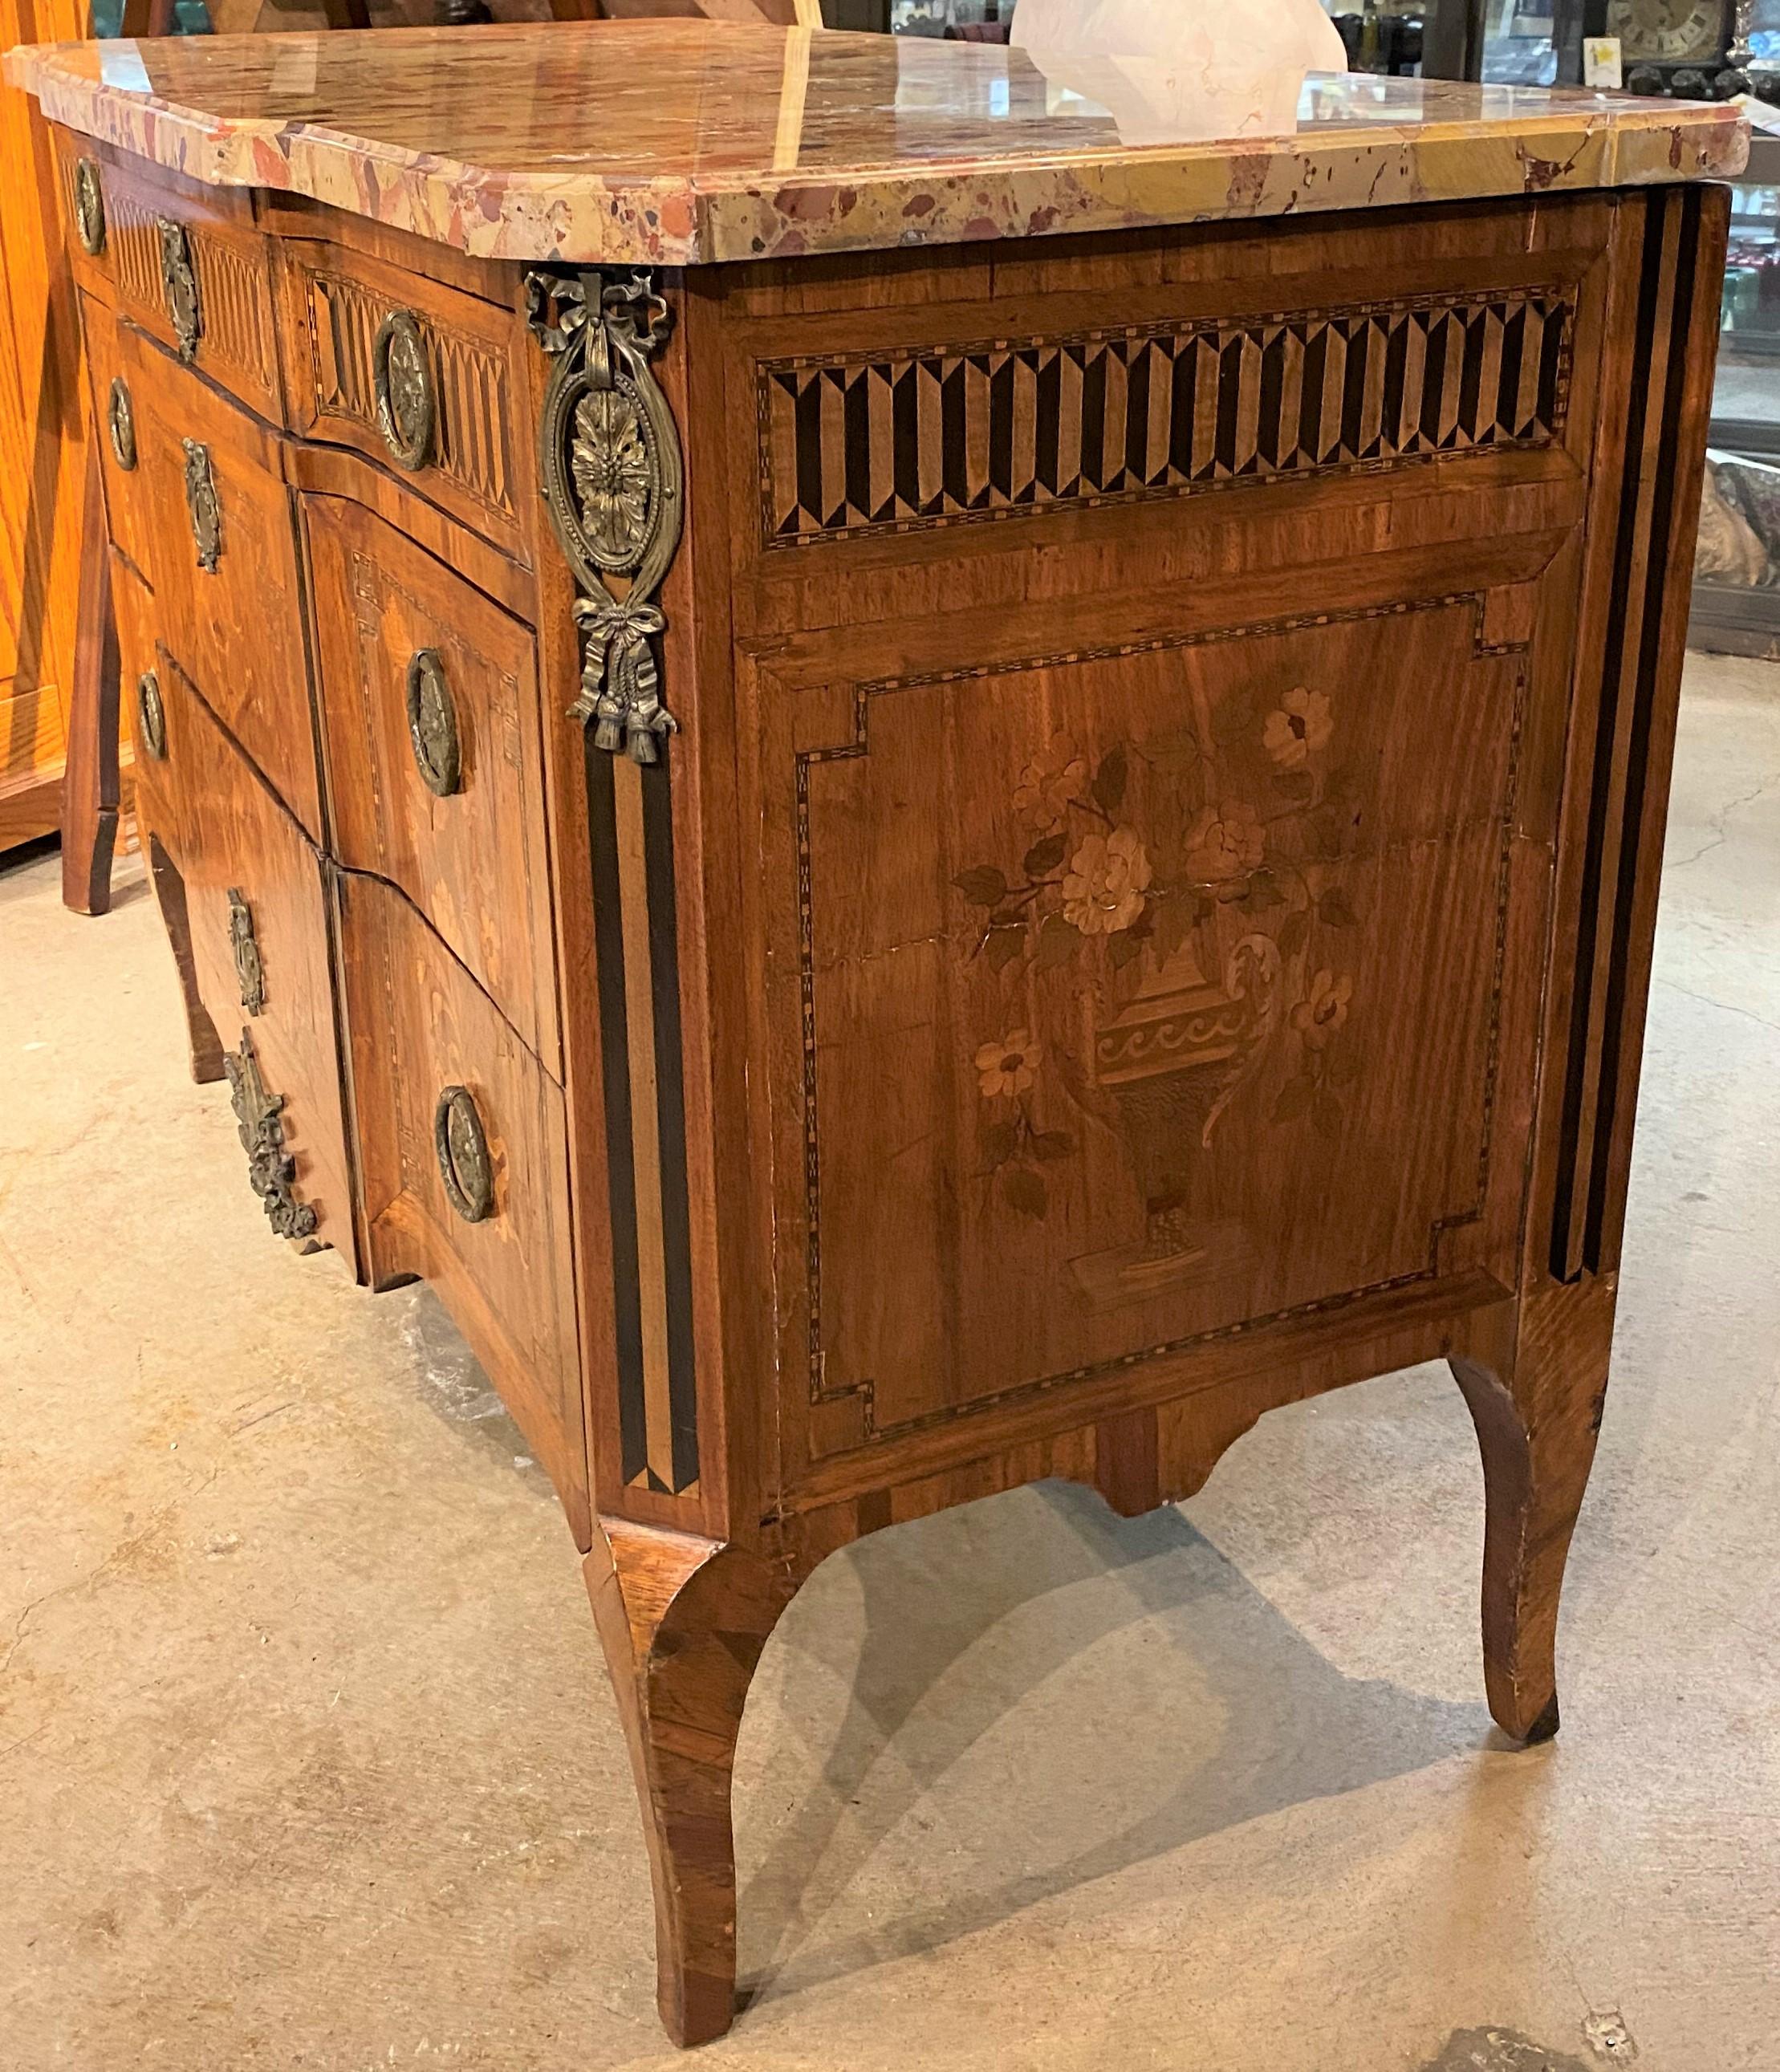 A beautiful French mahogany commode with fine marquetry, a conforming marble top with molded edges surmounting a case with three drawers, canted corners, applied ormolu on the corners, escutcheons, ring handles, and center drop, detailed foliate and